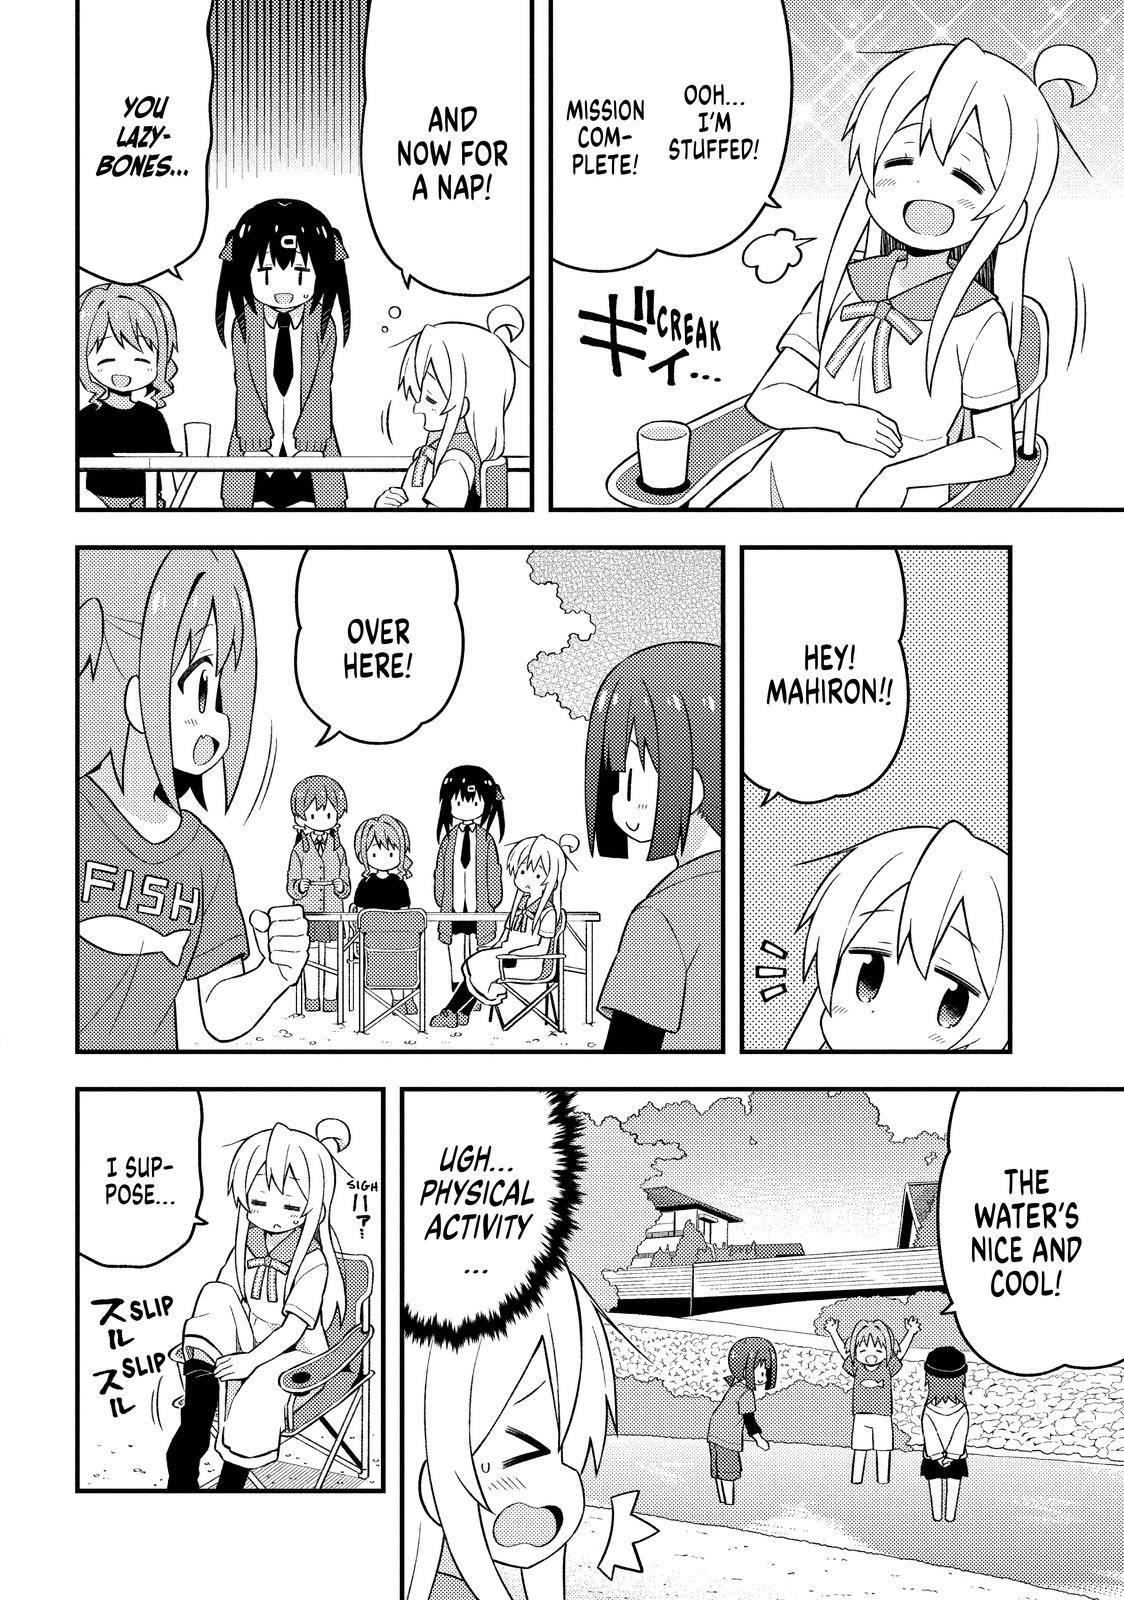 ONIMAI - I'm Now Your Sister! - chapter 44 - #6